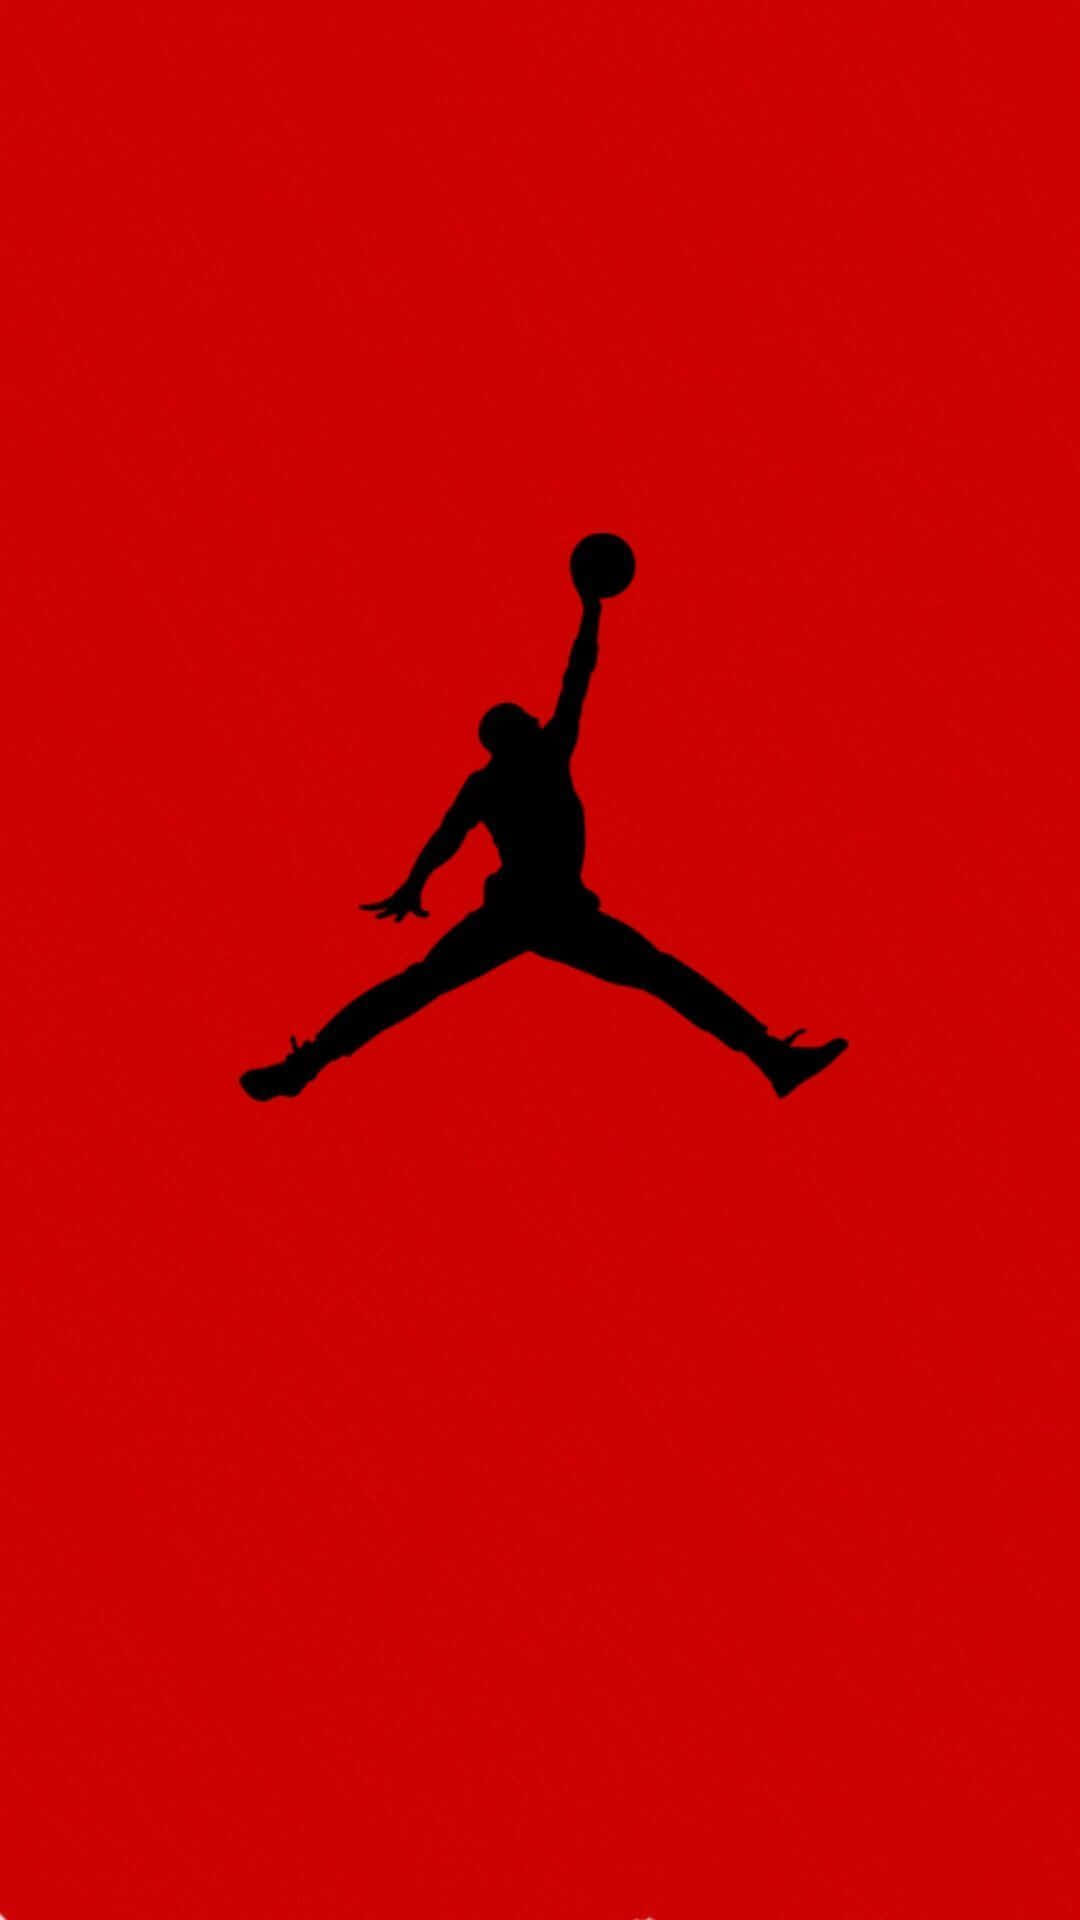 A Black Silhouette Of A Jordan Jumper On A Red Background Wallpaper